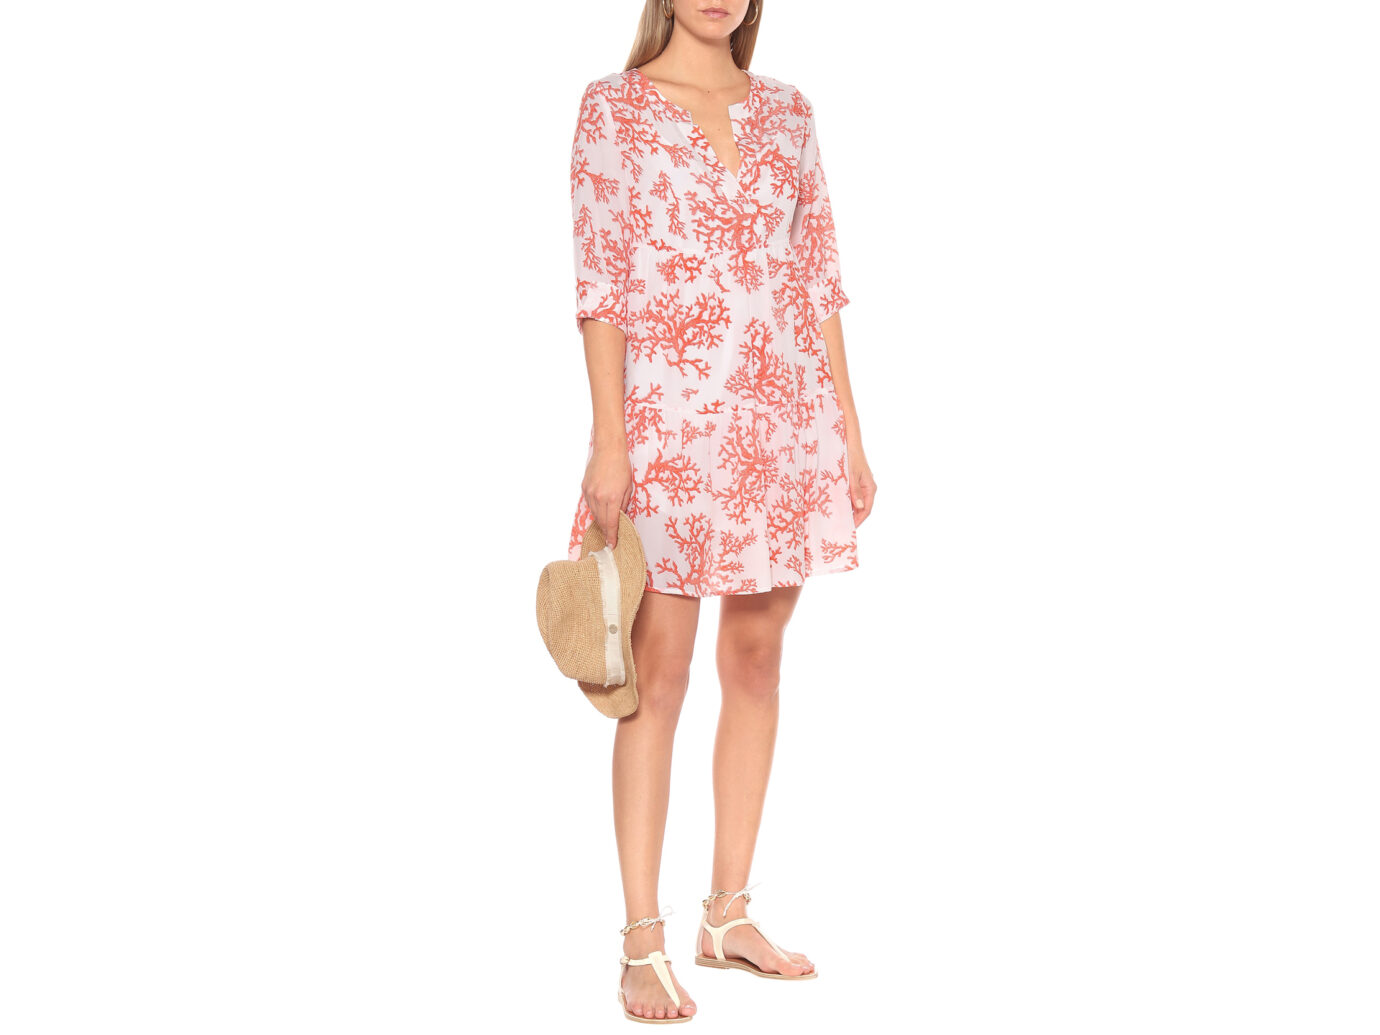 18 Beach Resort Dresses to Pack for a Tropical Vacation (2020) | Jetsetter